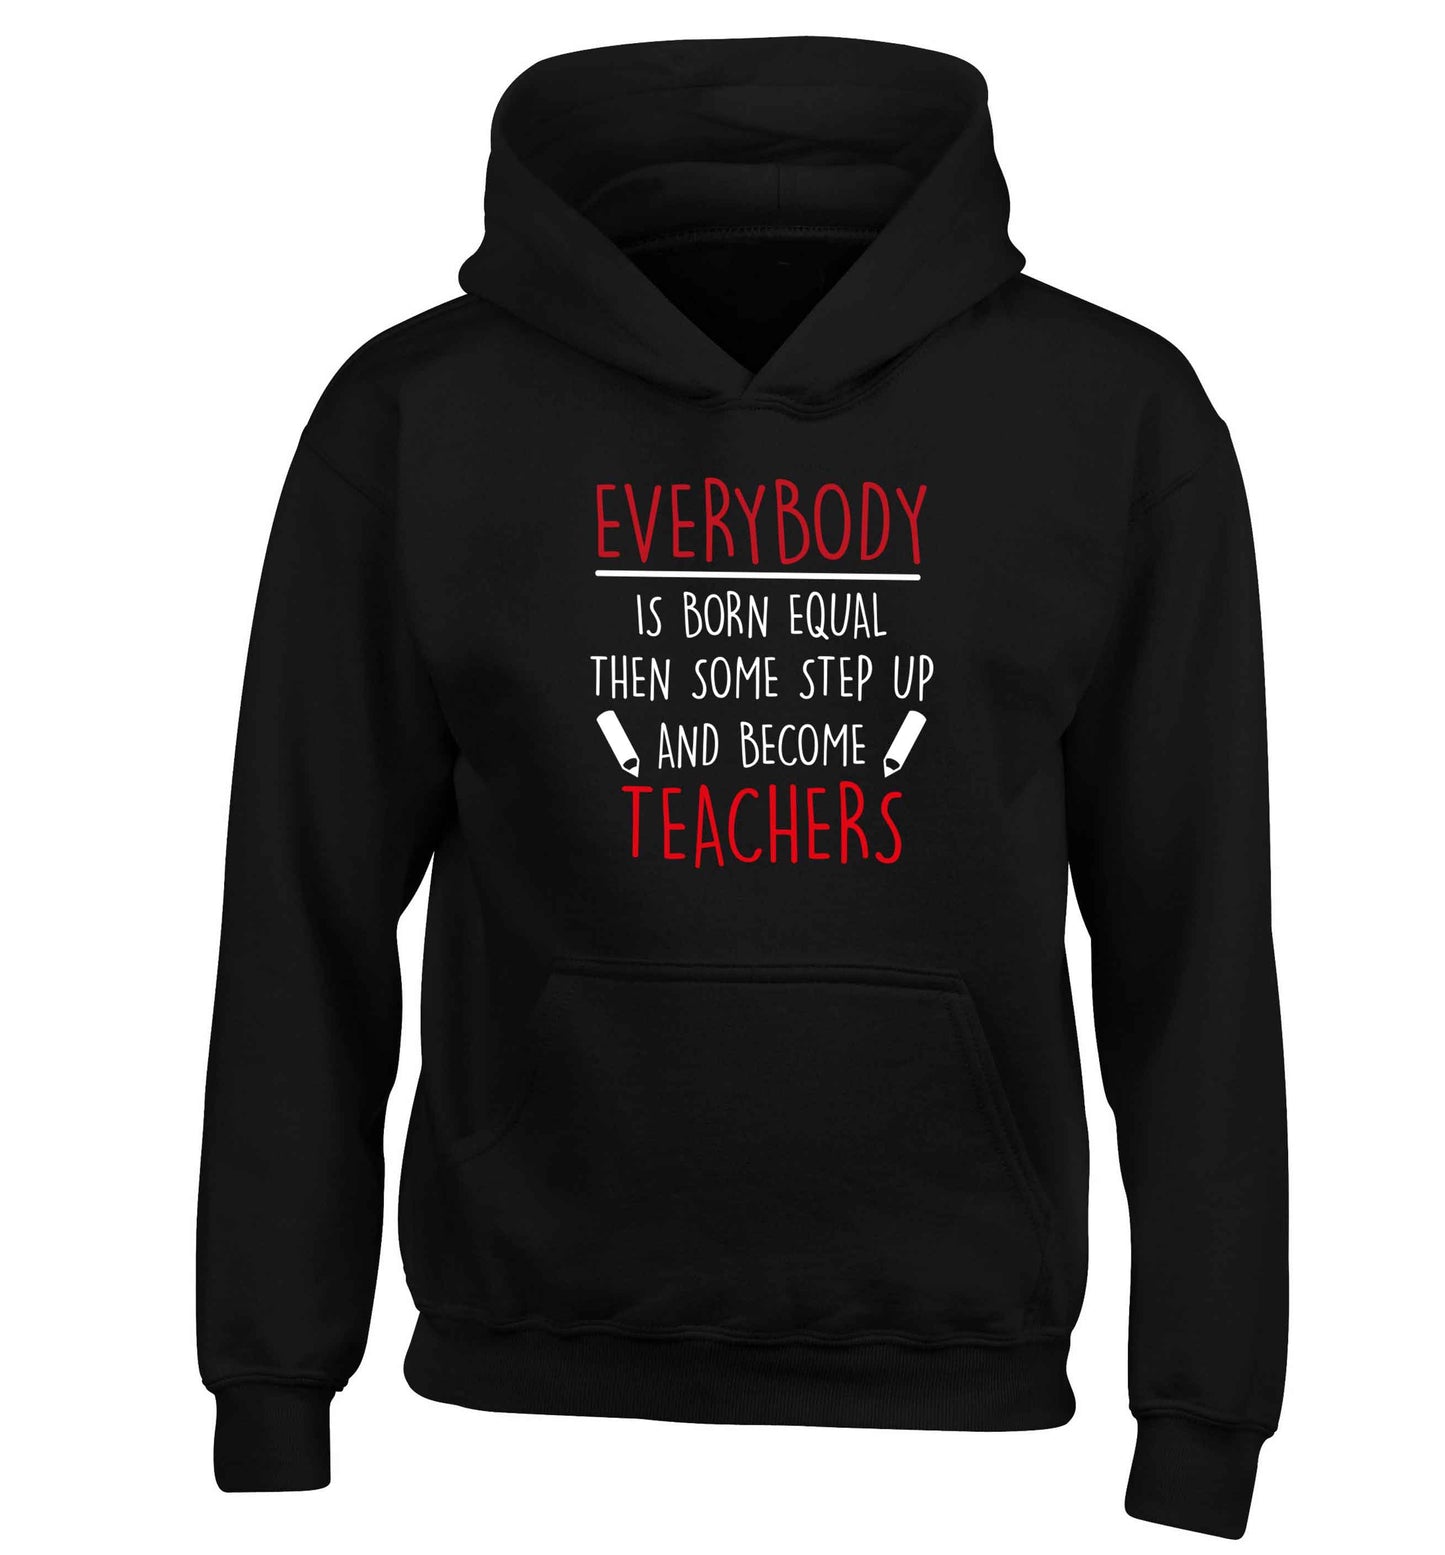 Everybody is born equal then some step up and become teachers children's black hoodie 12-13 Years